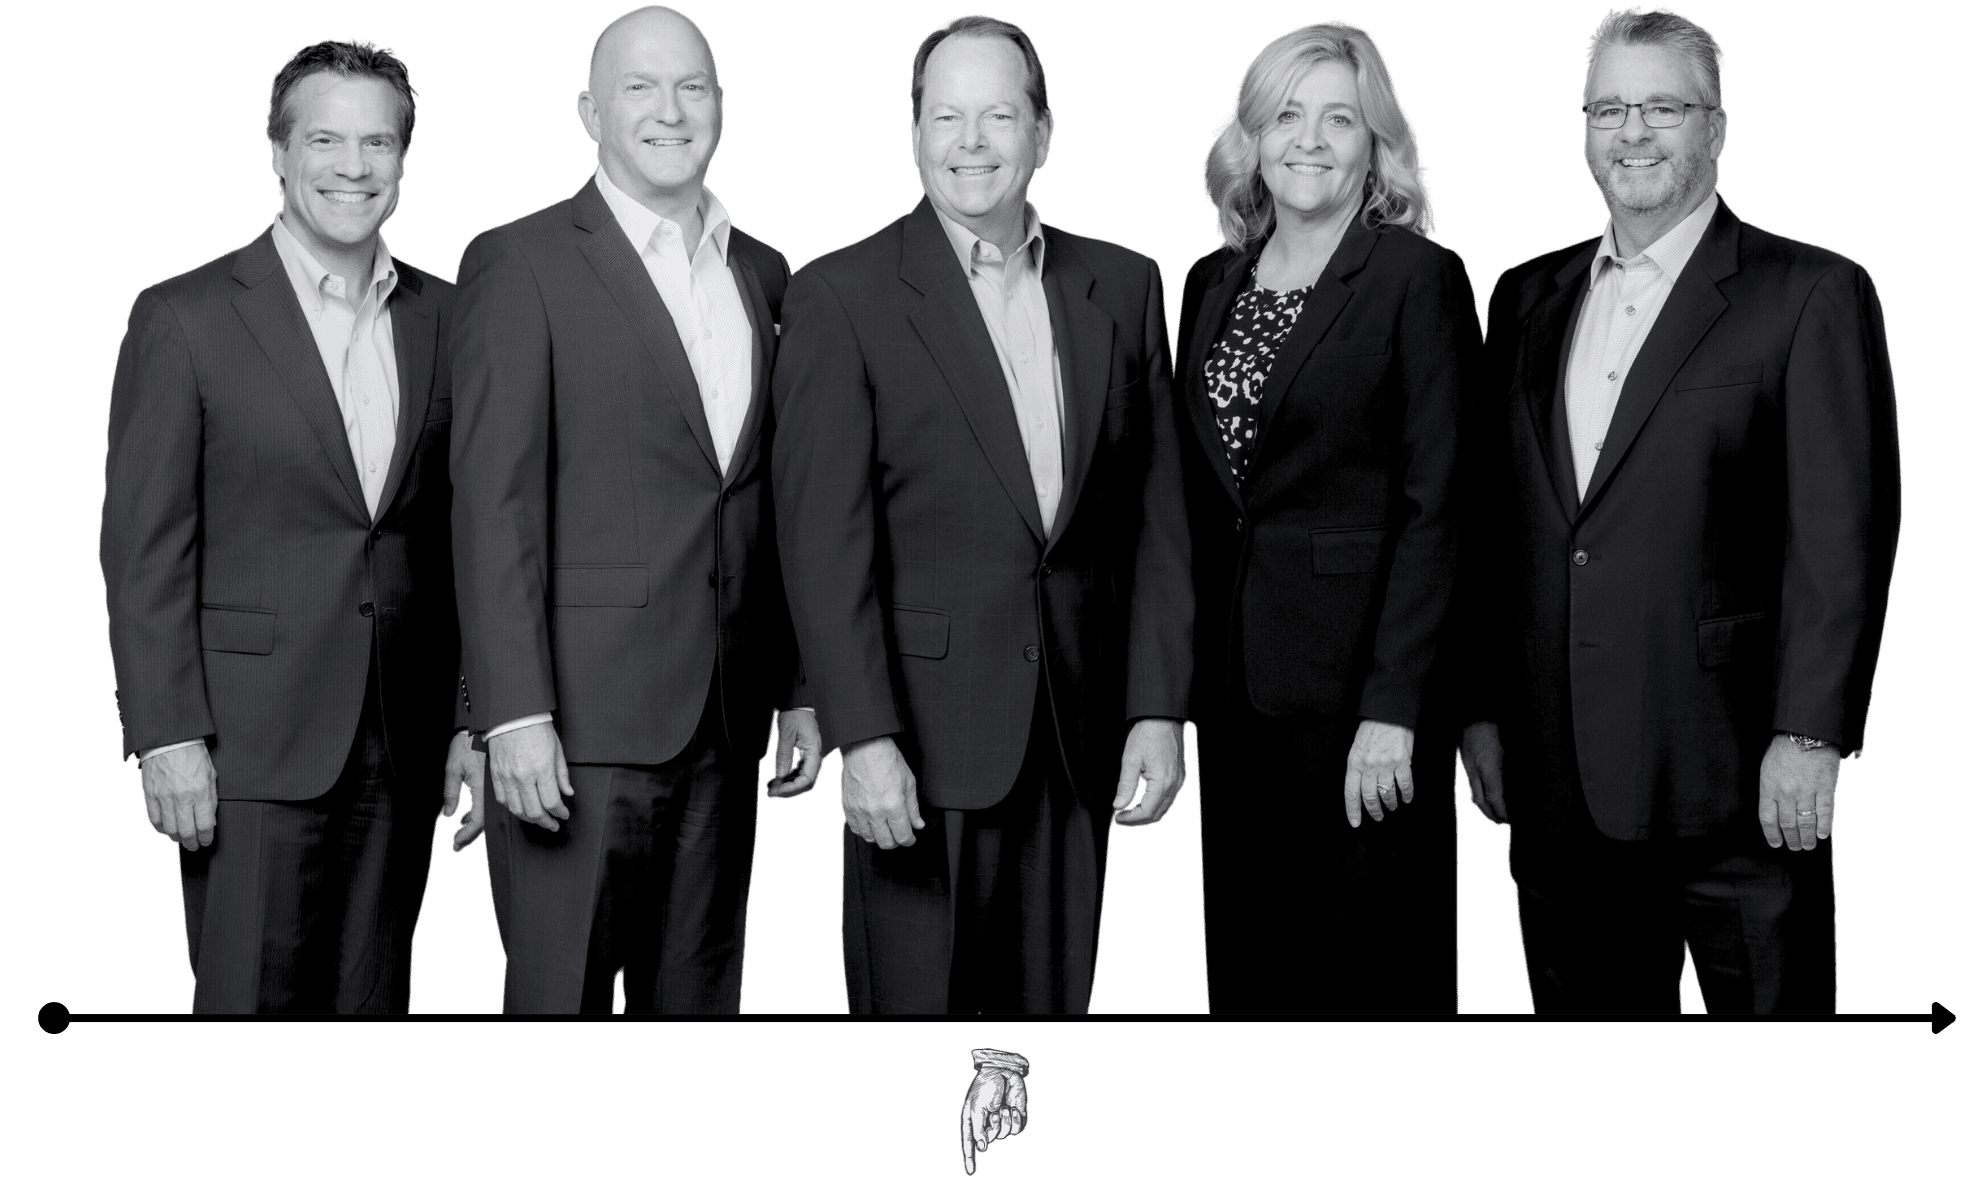 Capital Growth Inc. San Diego's Top Wealth Management Firm Team Photo Shoot